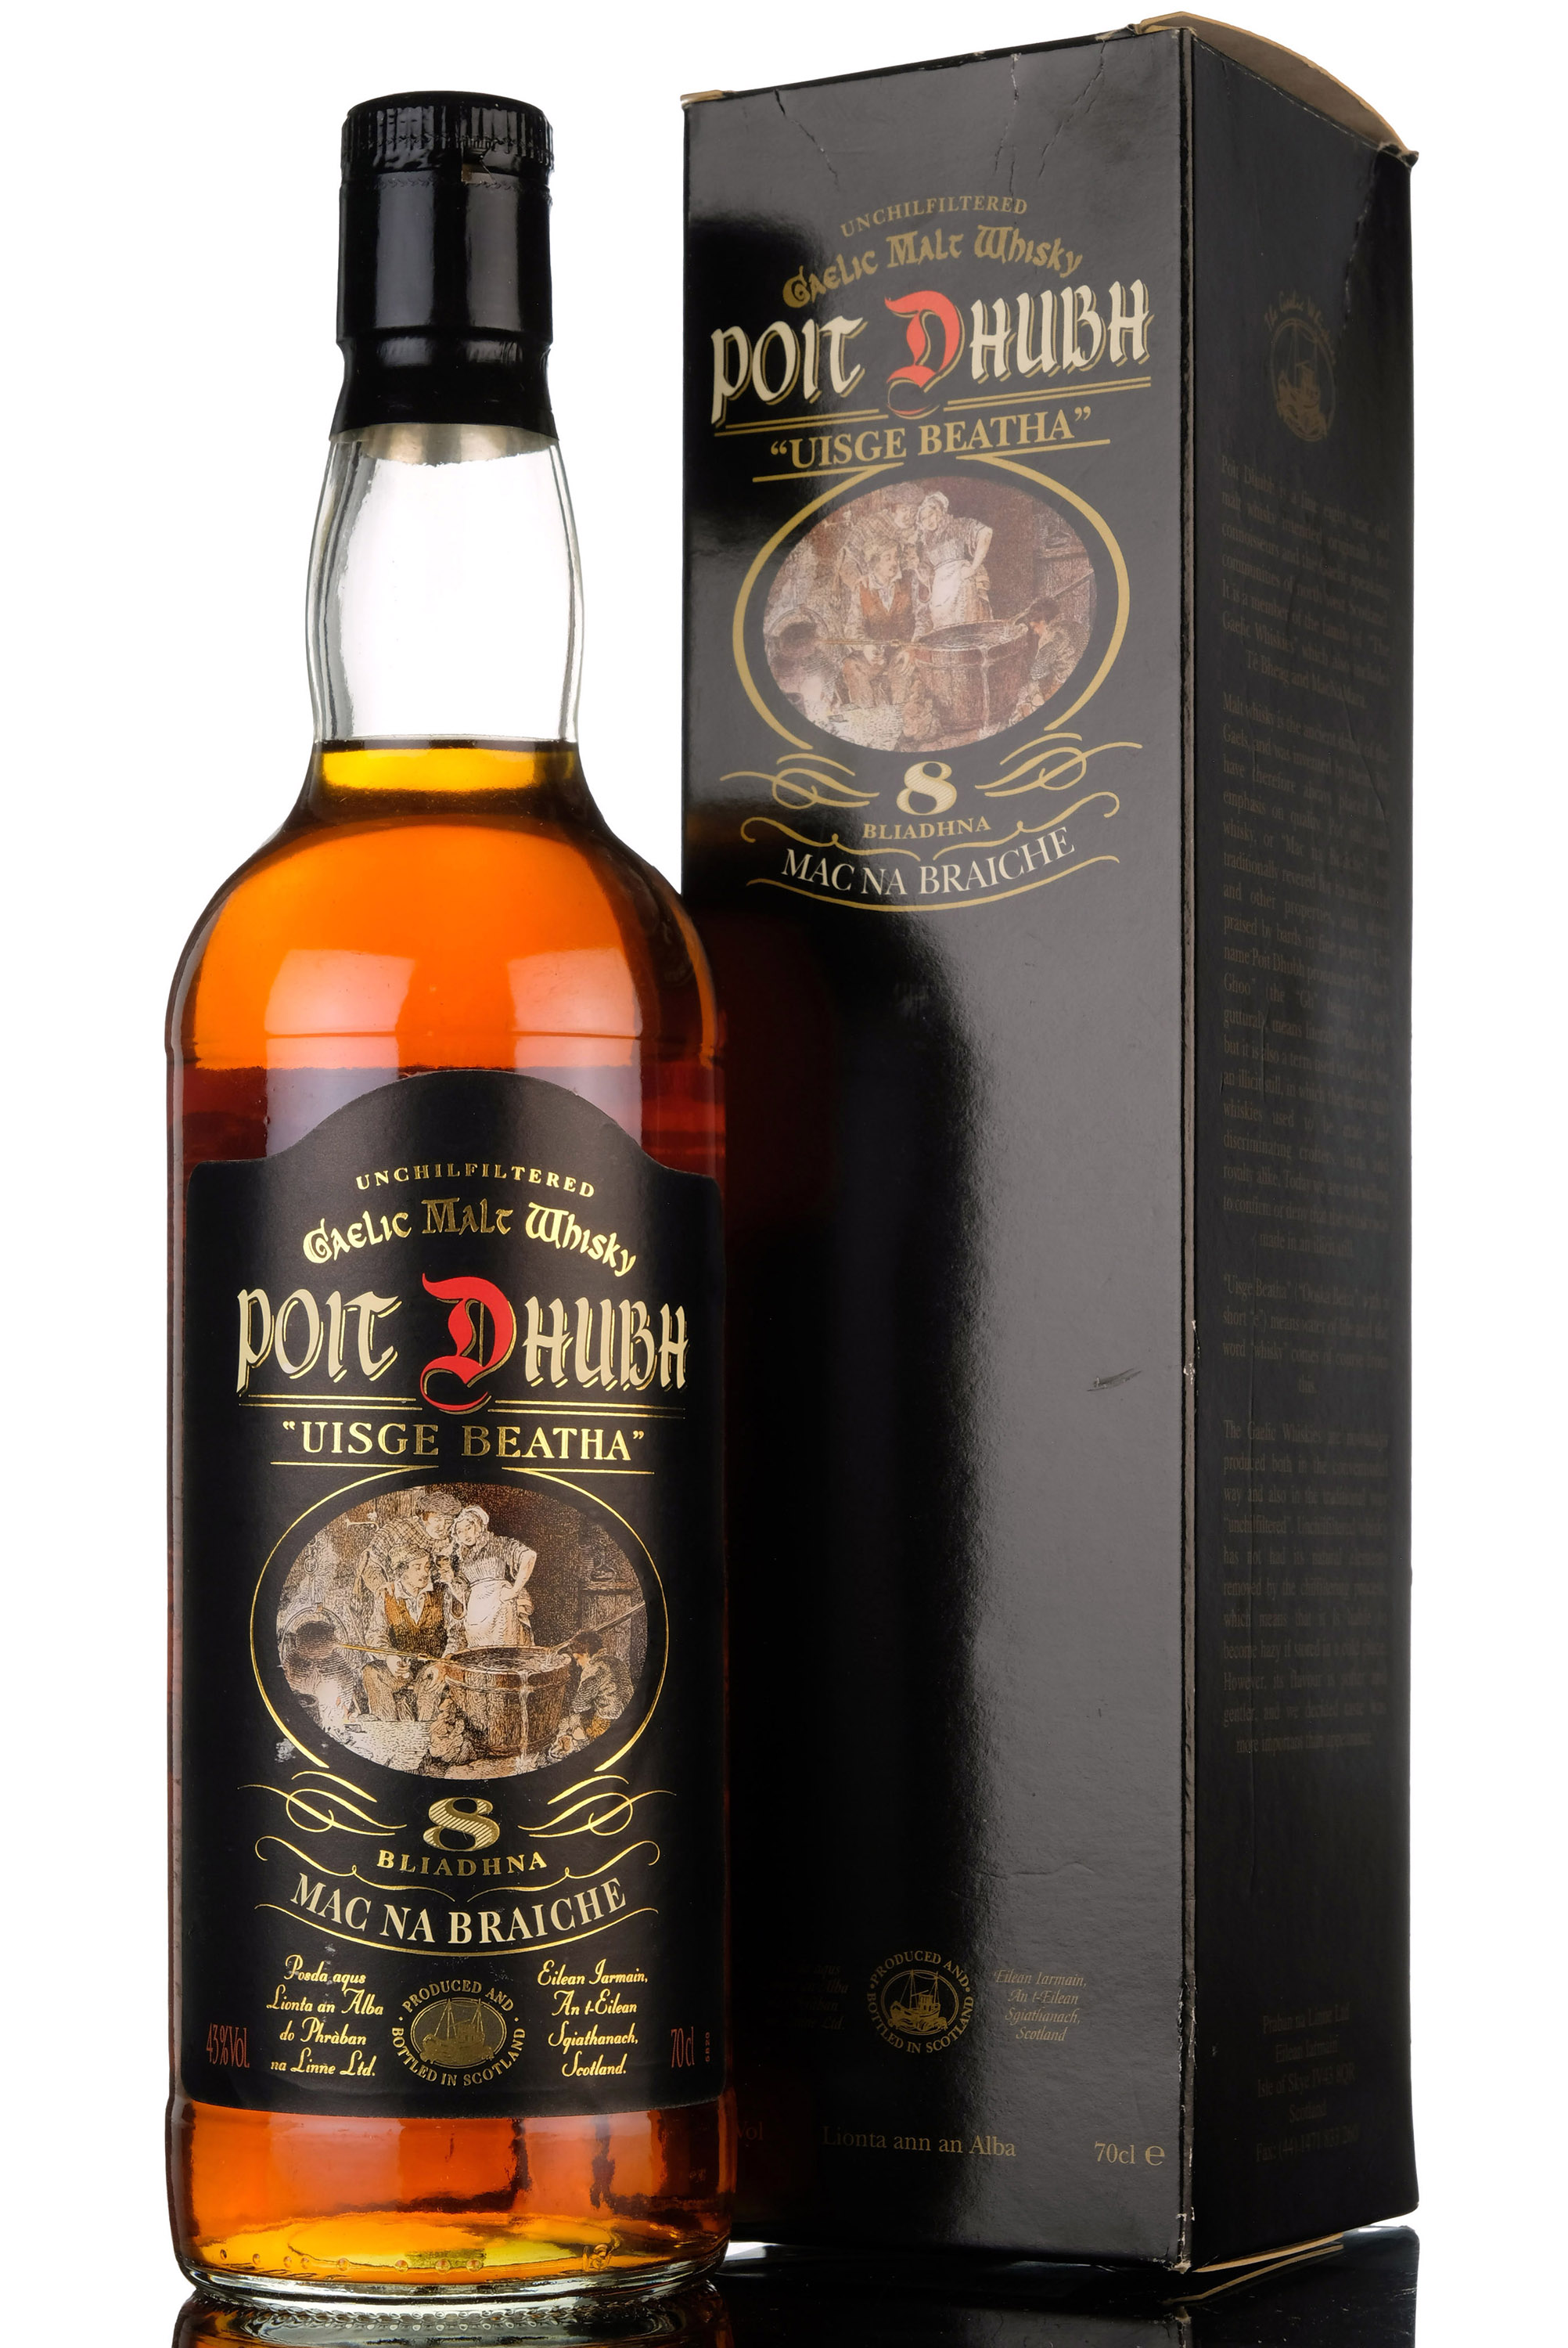 Poit Dhubh 8 Year Old - Early 2000s